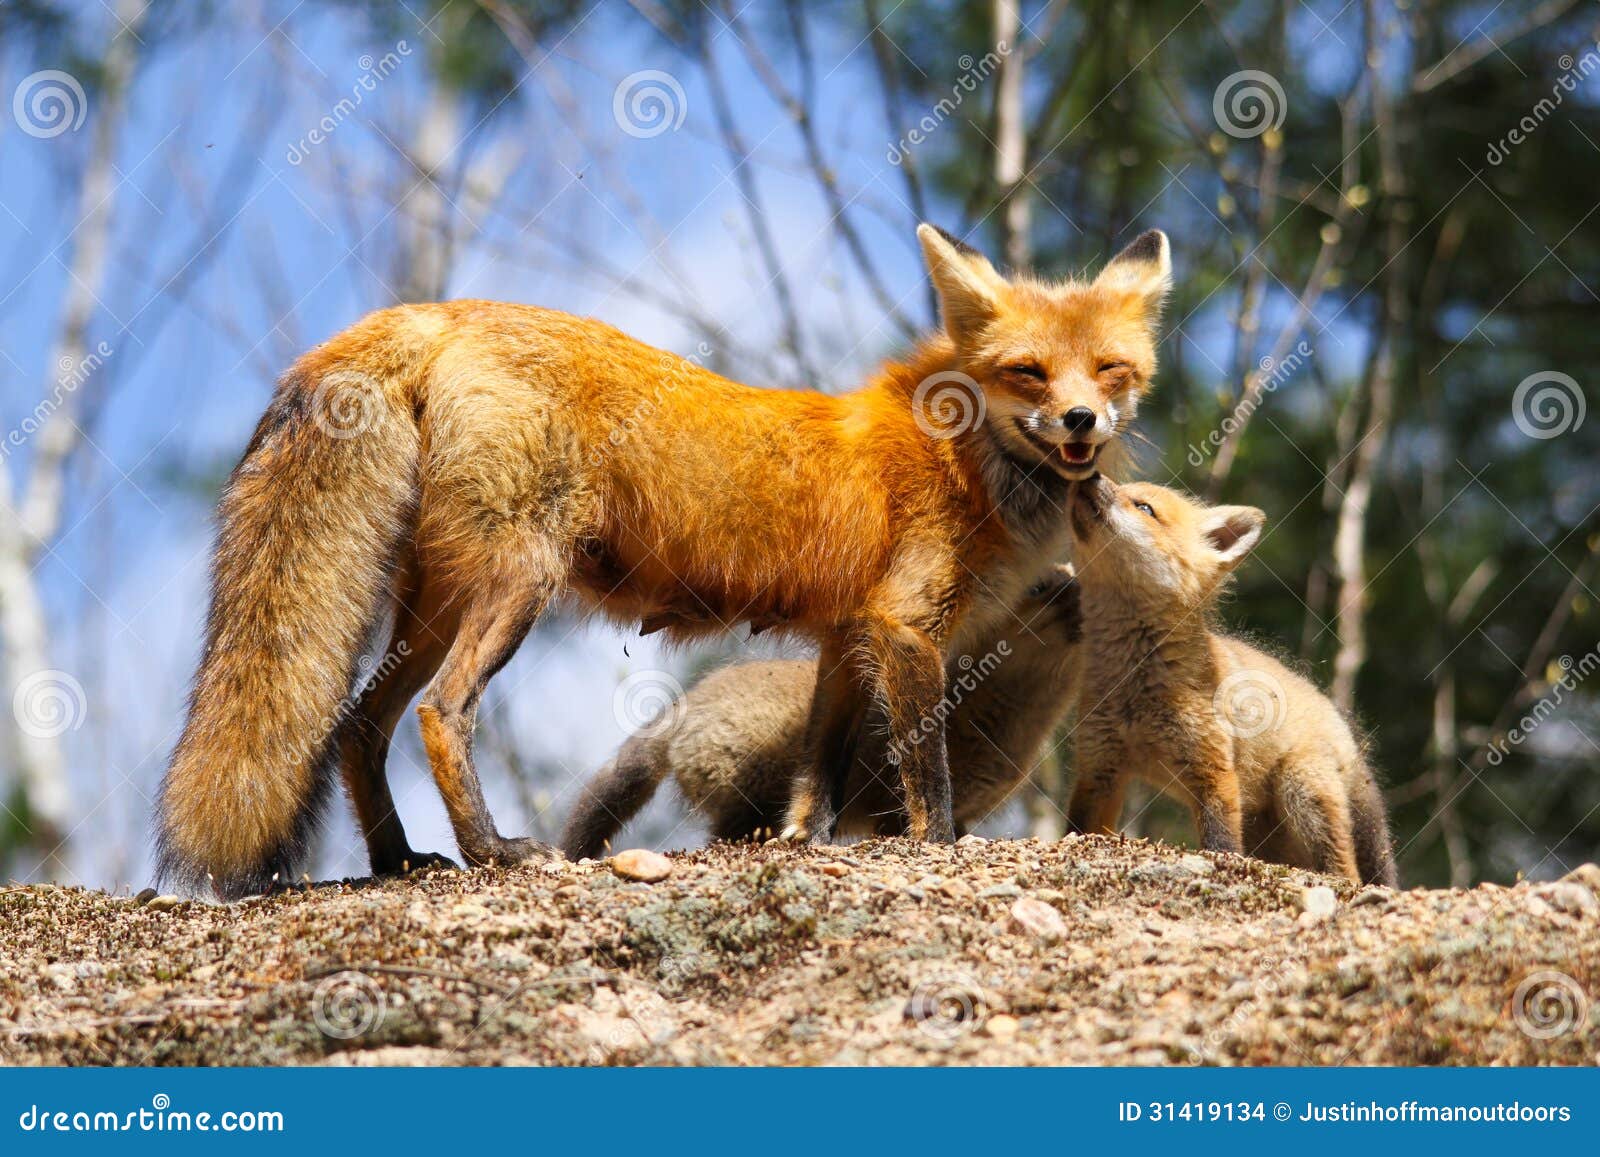 red fox mother and kits